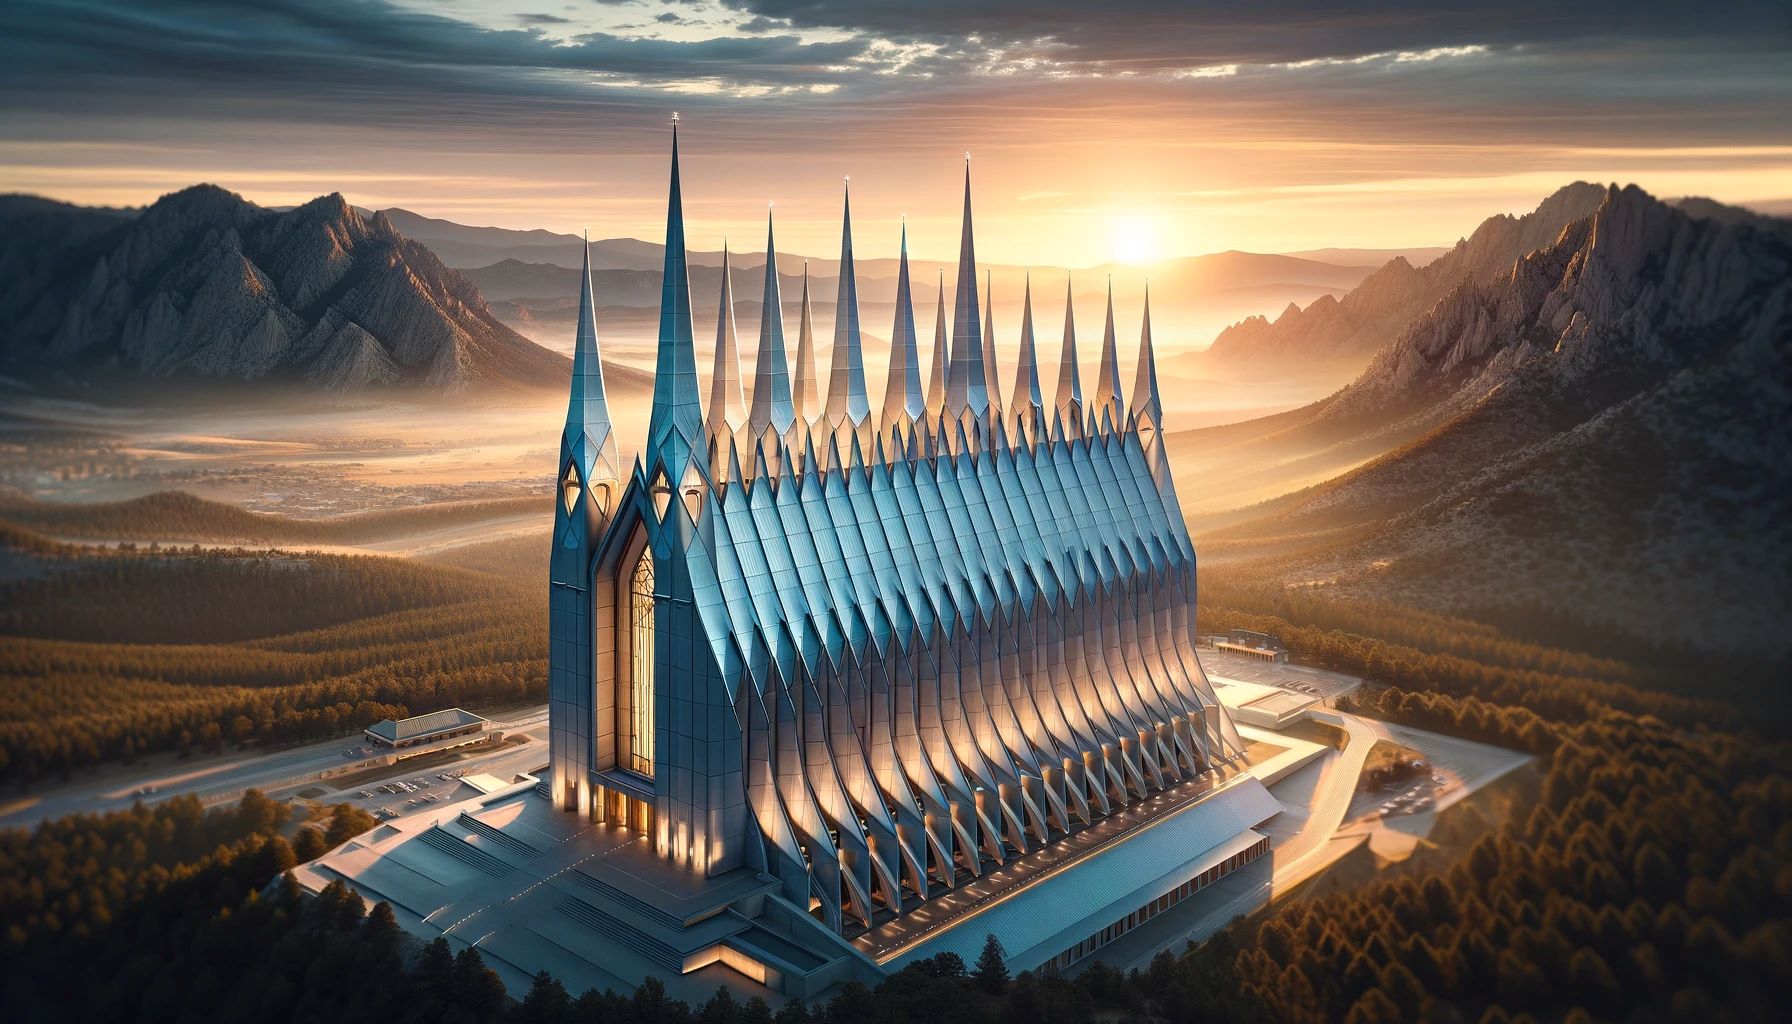 Who Designed The Air Force Academy Chapel